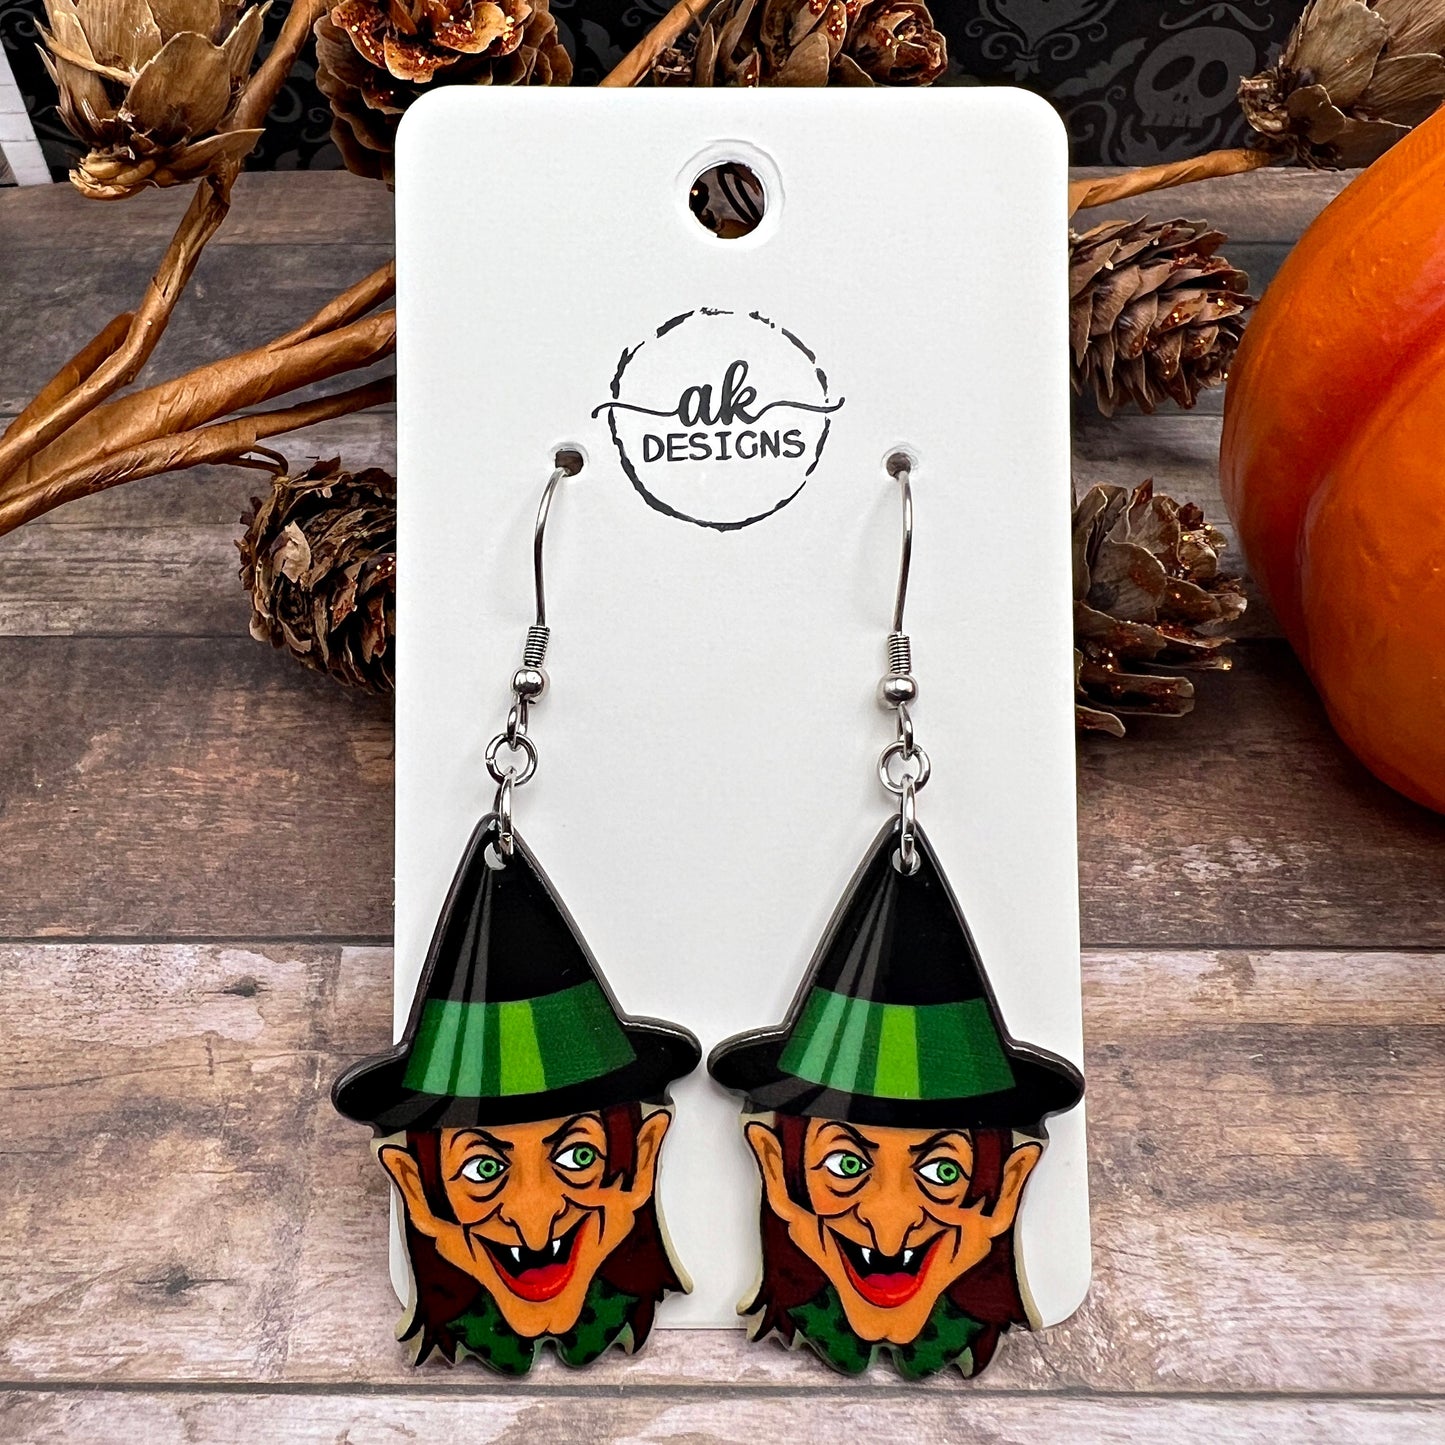 Vintage Retro Inspired Halloween Earrings, Witch Black Cat, Silver/Silver-tone  Earrings, Hypoallergenic Gift